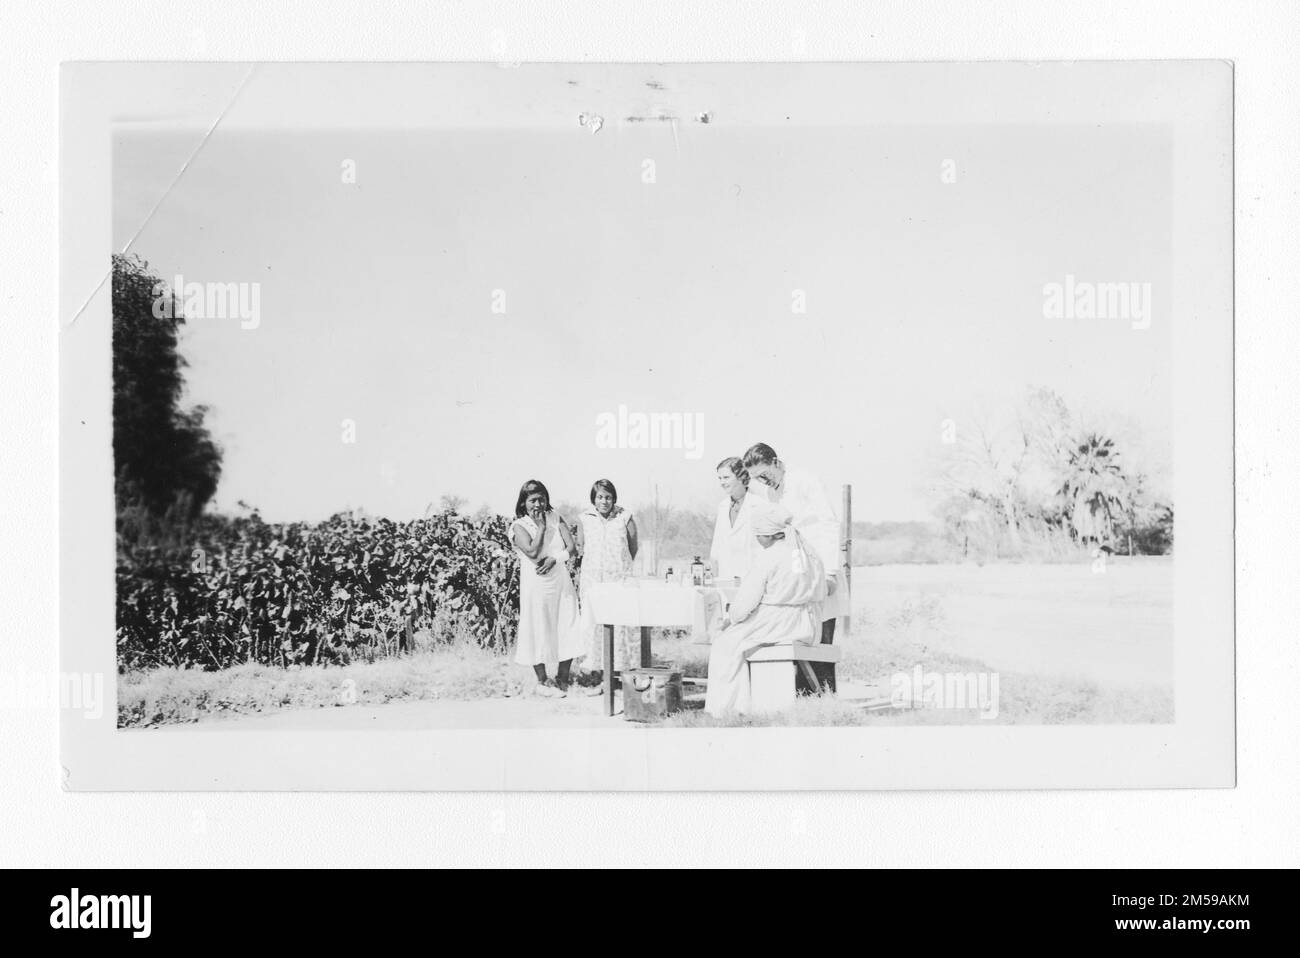 Original caption: 'A reluctant patient (Nurse Mabel Cowser and Dr. Gray)'. 1936 - 1942. Pacific Region (Riverside, CA). Photographic Print. Department of the Interior. Office of Indian Affairs. Mission Agency. 11/15/1920-6/17/1946. Photographs Stock Photo